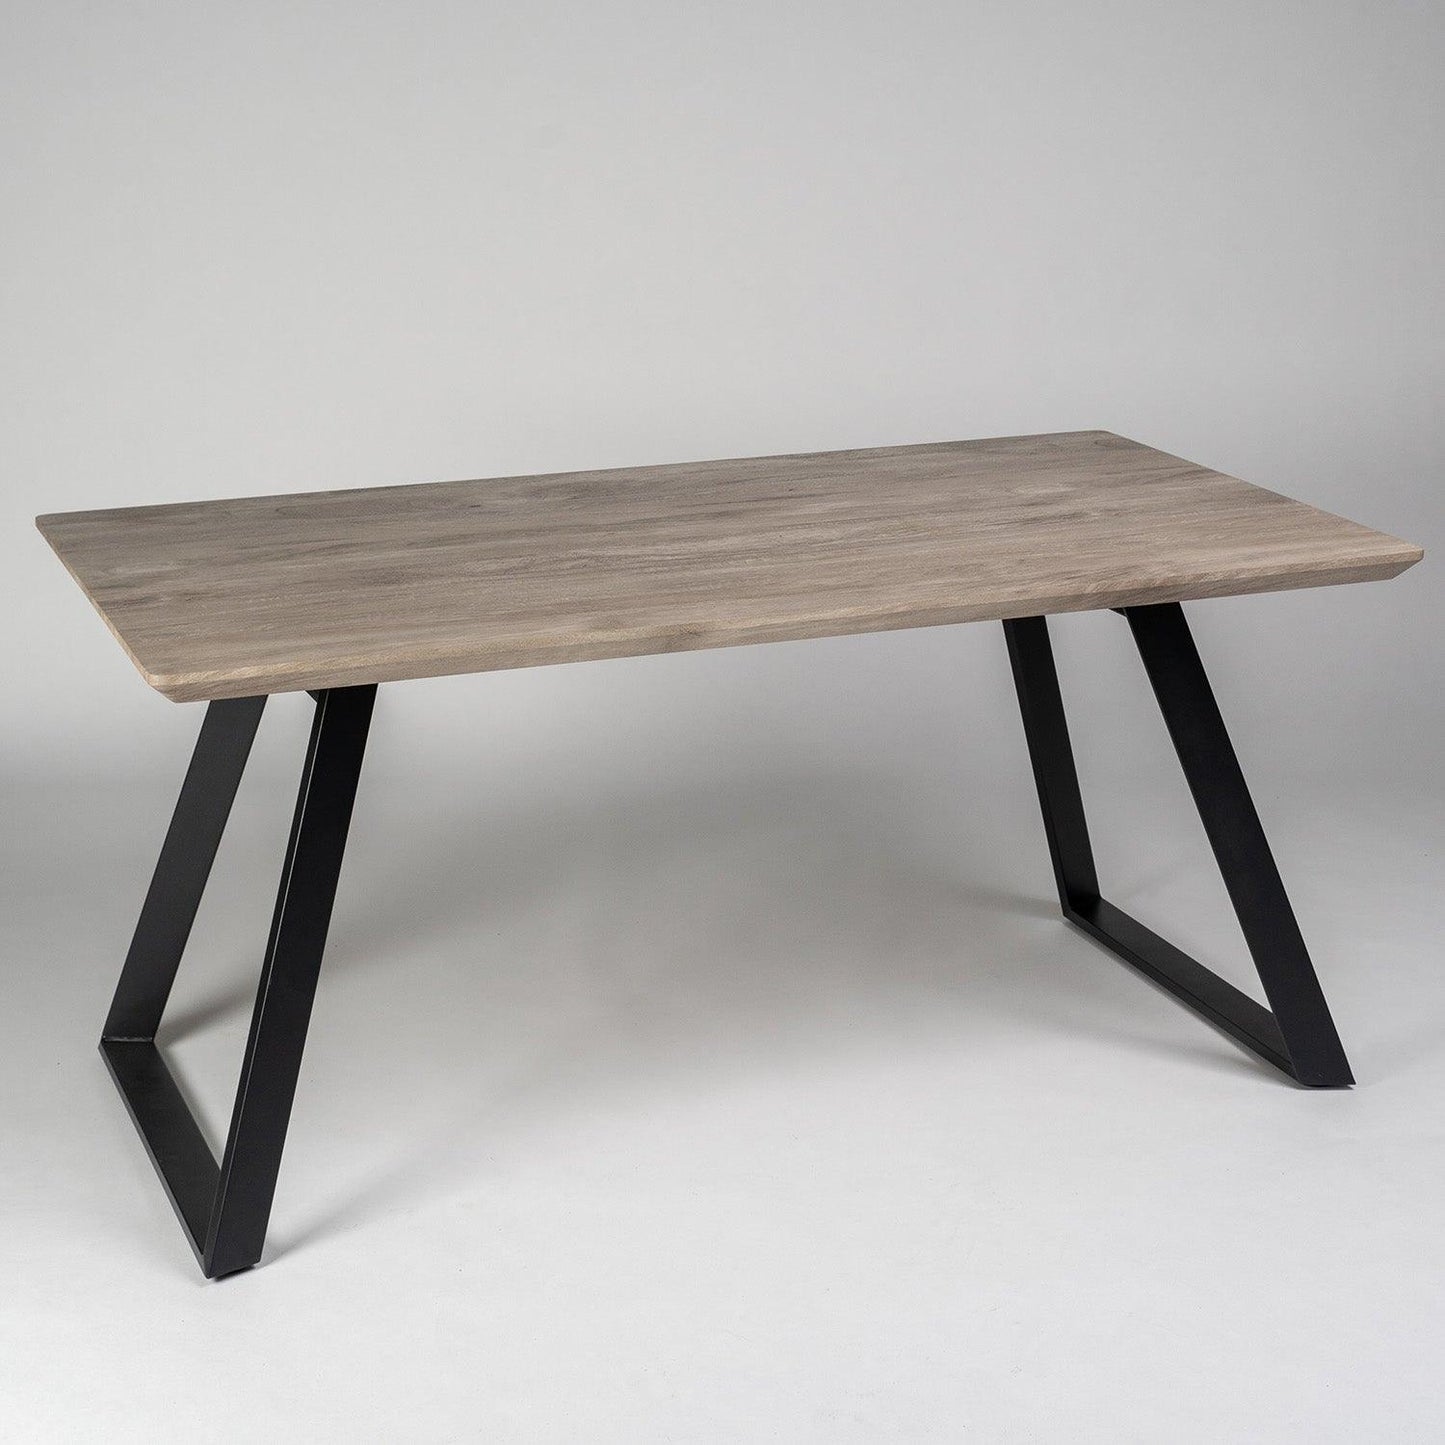 Atlas Wood Effect Dining Room Table with Black Legs